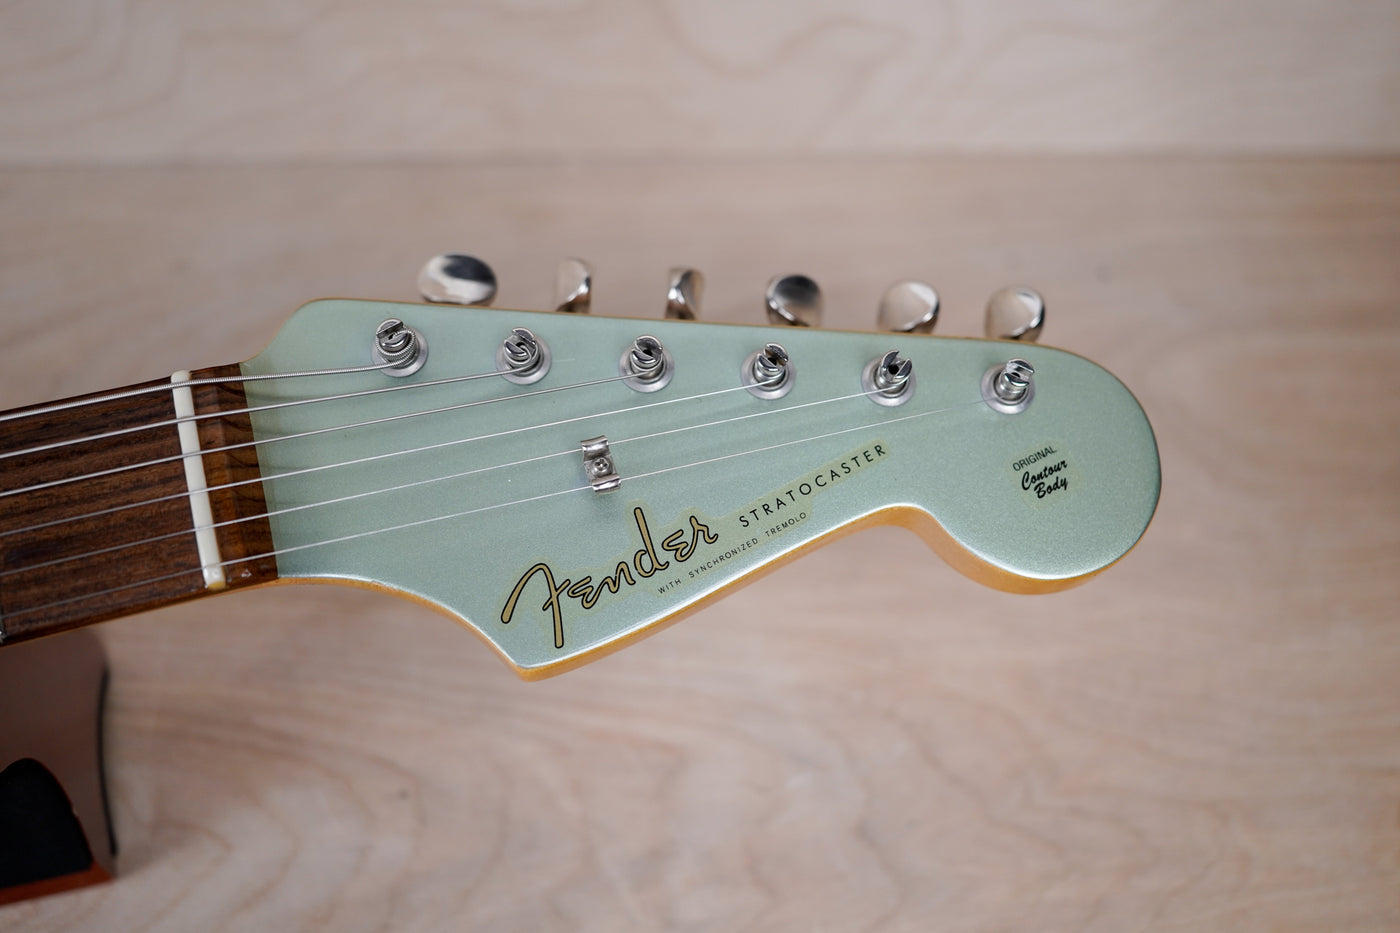 Fender American Vintage '62 Stratocaster Reissue 2001 Aged Ice Blue Metallic Matching Headstock w/ OHSC